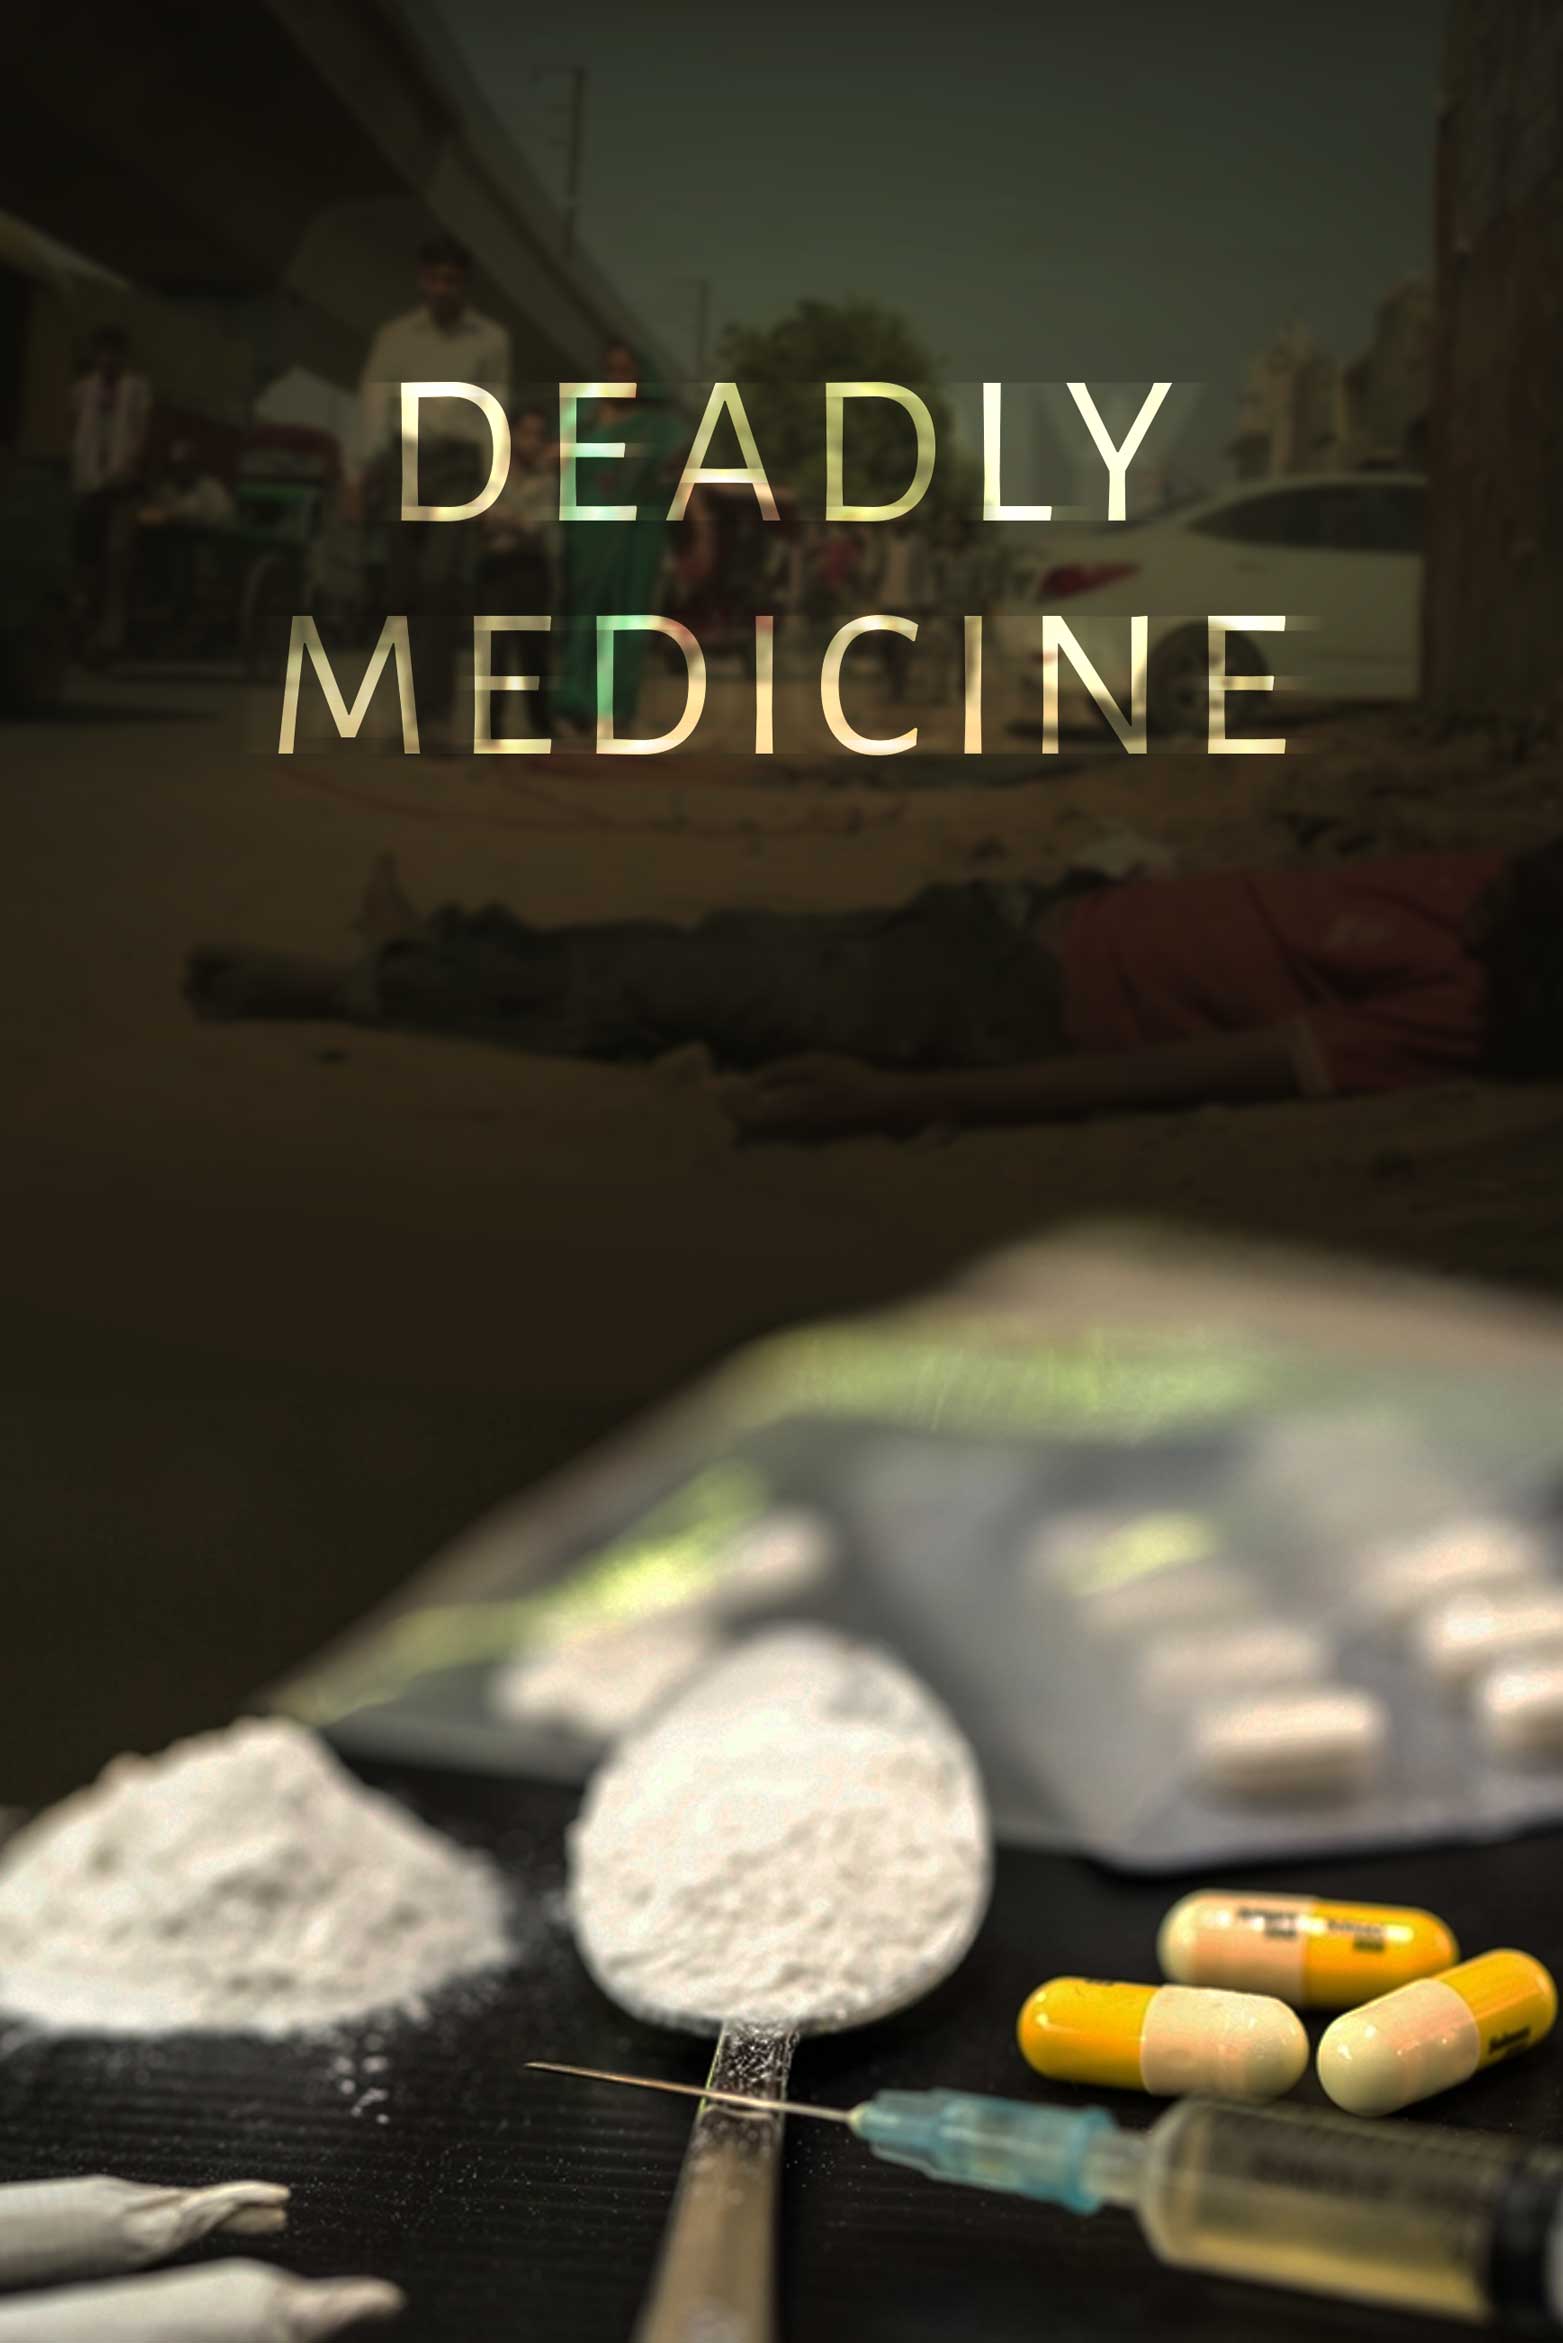 Deadly Medicine (Drugs: Cannabis Country, Heroin Fix, India's addicts)